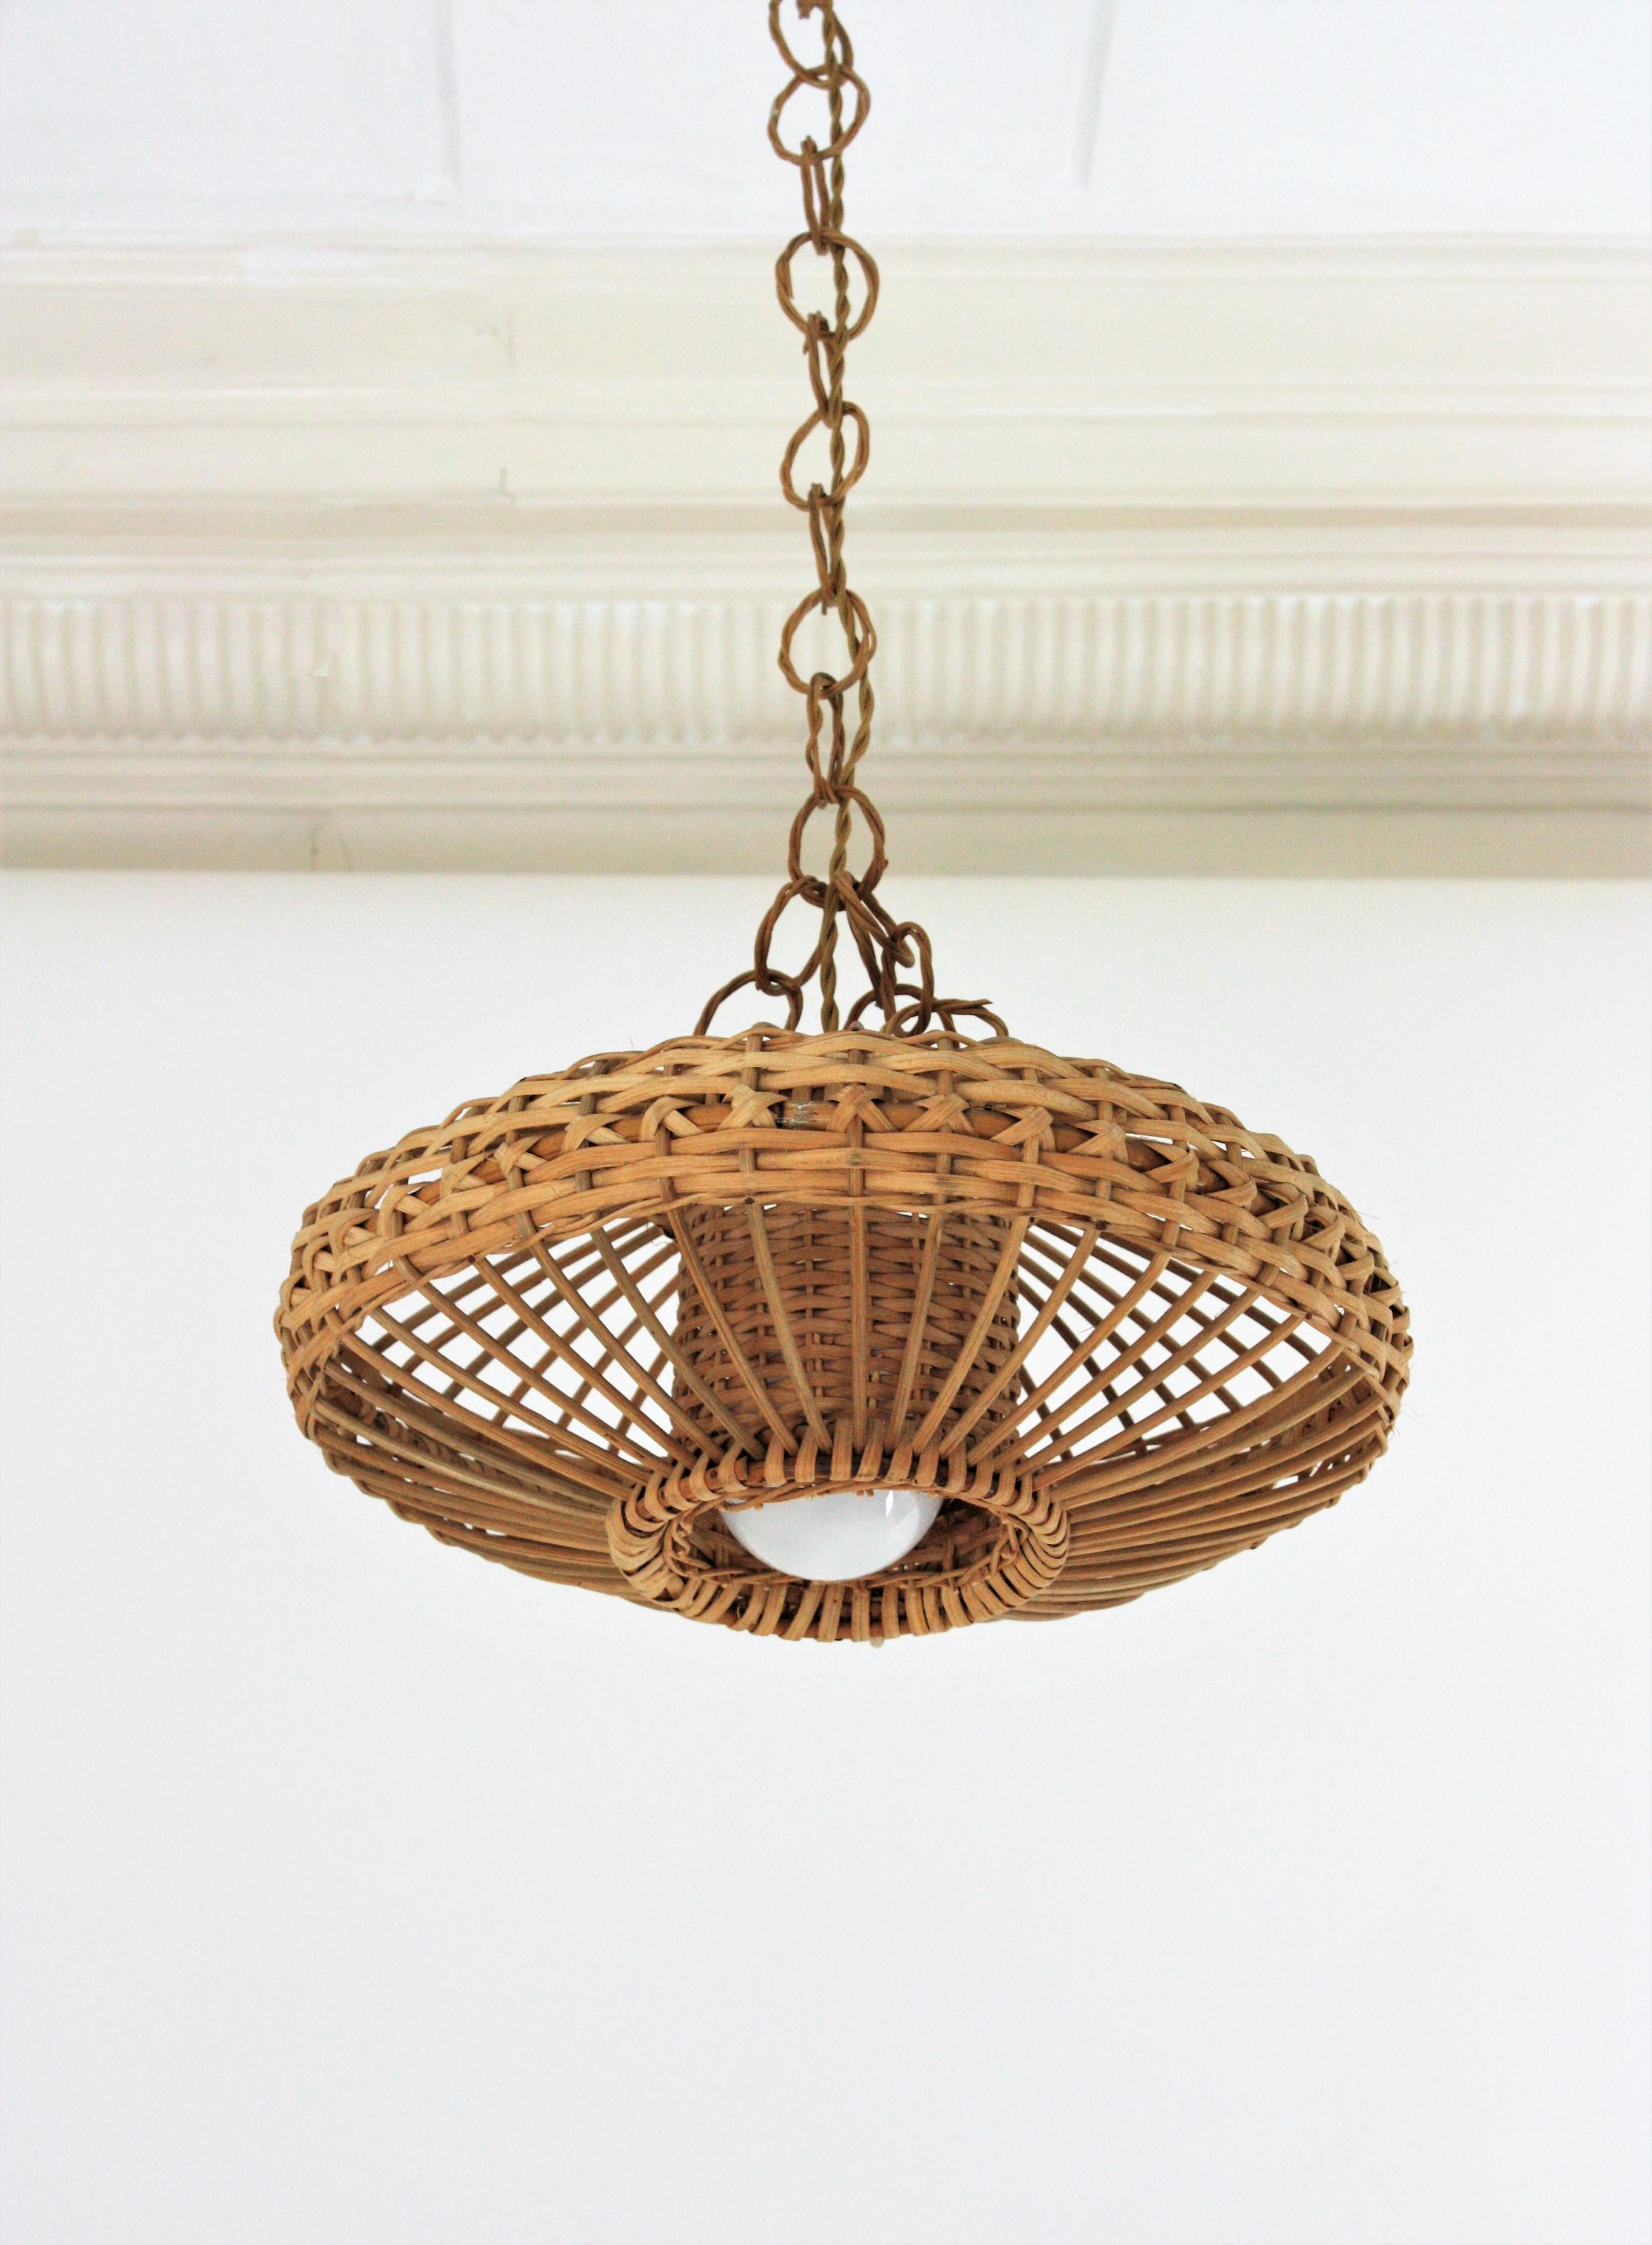 Eye-catching handcrafted braided rattan / wicker pendant hanging lamp. Spain, 1960s.
This beautiful suspension lamp features a woven wicker ufo shaped lampshade with an inner cylinder lampshade. It hangs from a chain with braided rattan links ended